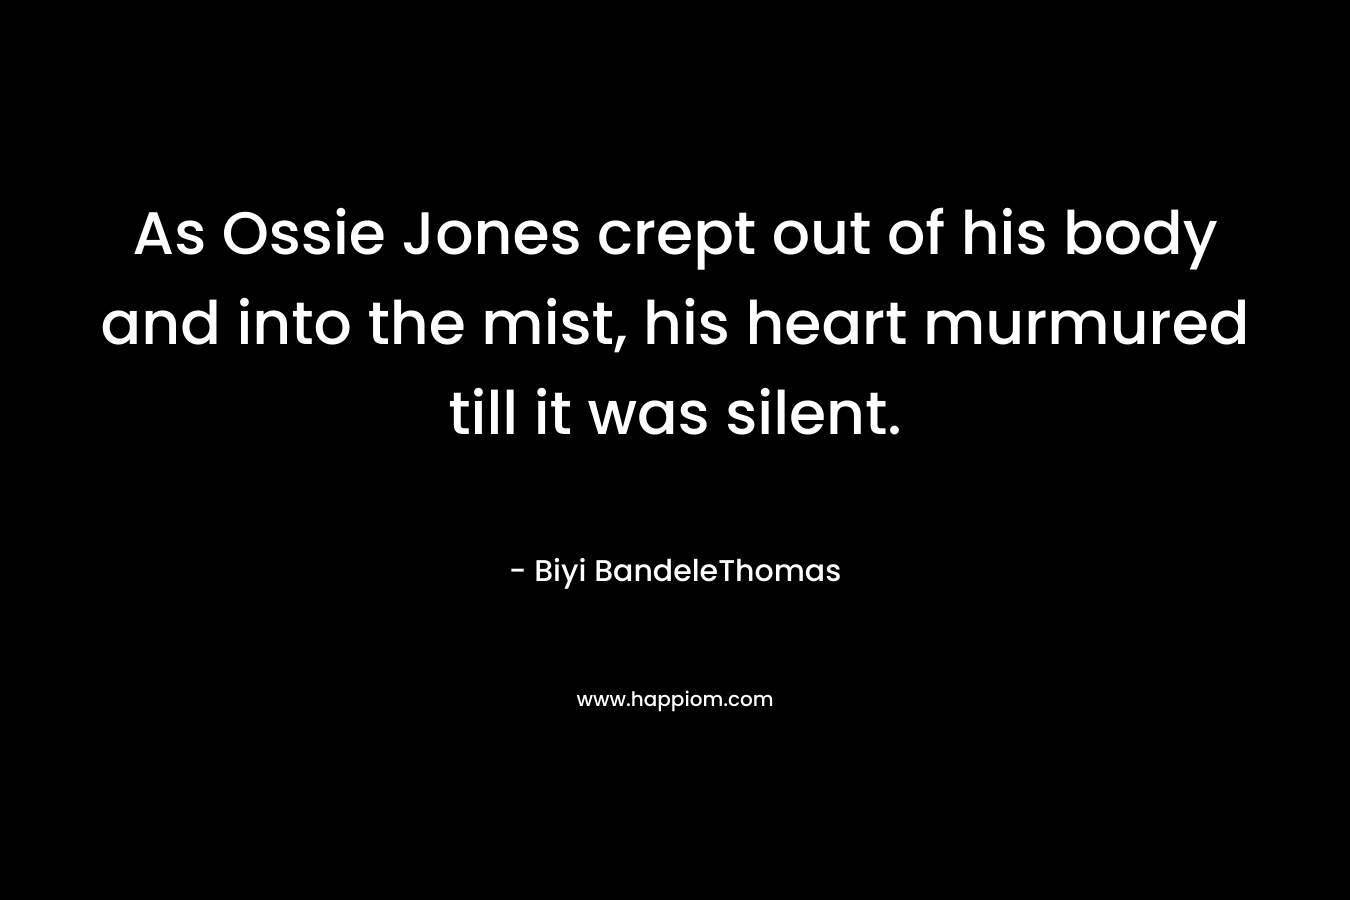 As Ossie Jones crept out of his body and into the mist, his heart murmured till it was silent. – Biyi BandeleThomas